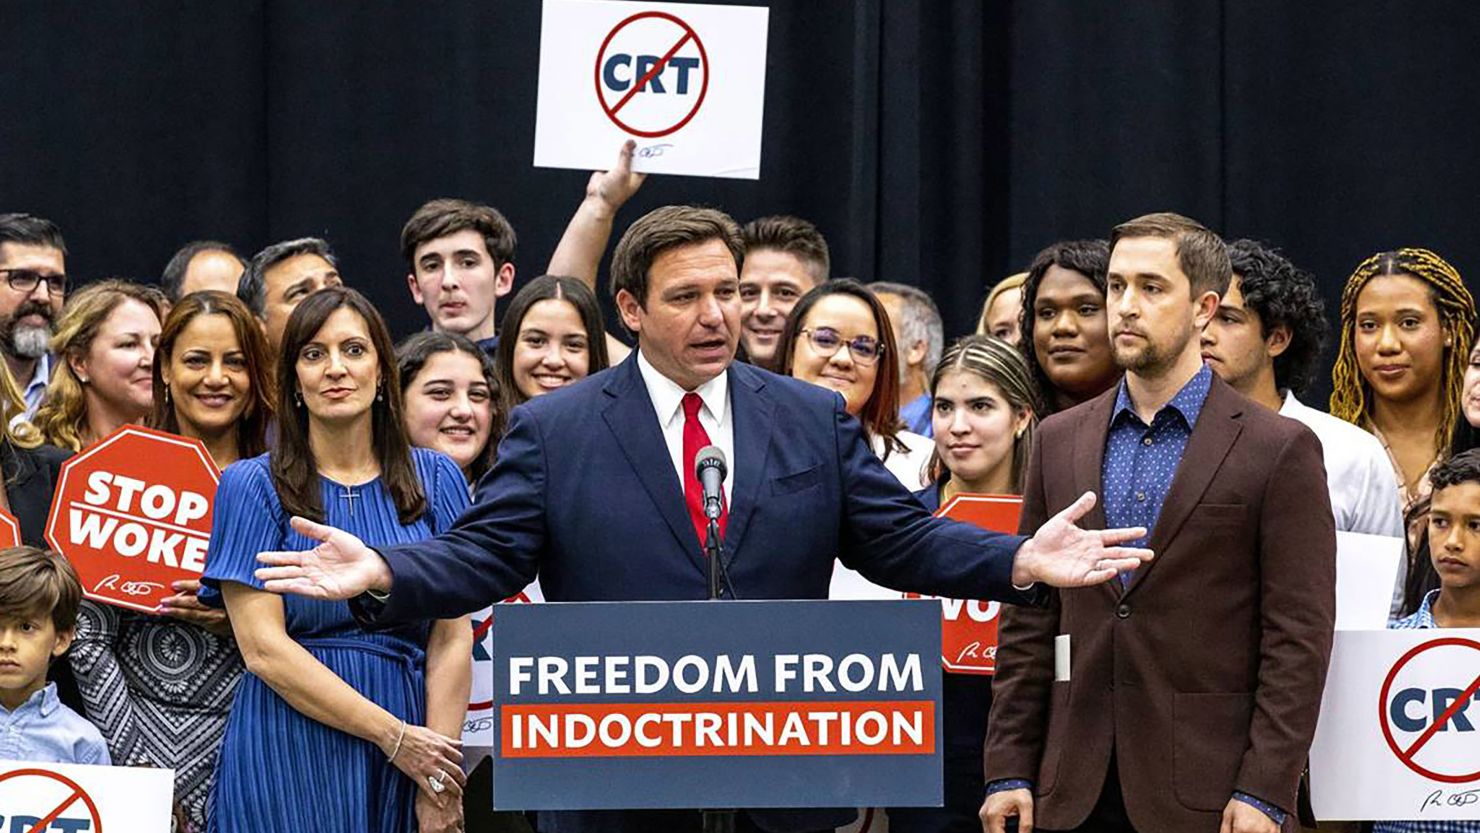 Florida Gov. Ron DeSantis signed HB 7, known as the "Stop WOKE Act," in April 2022.